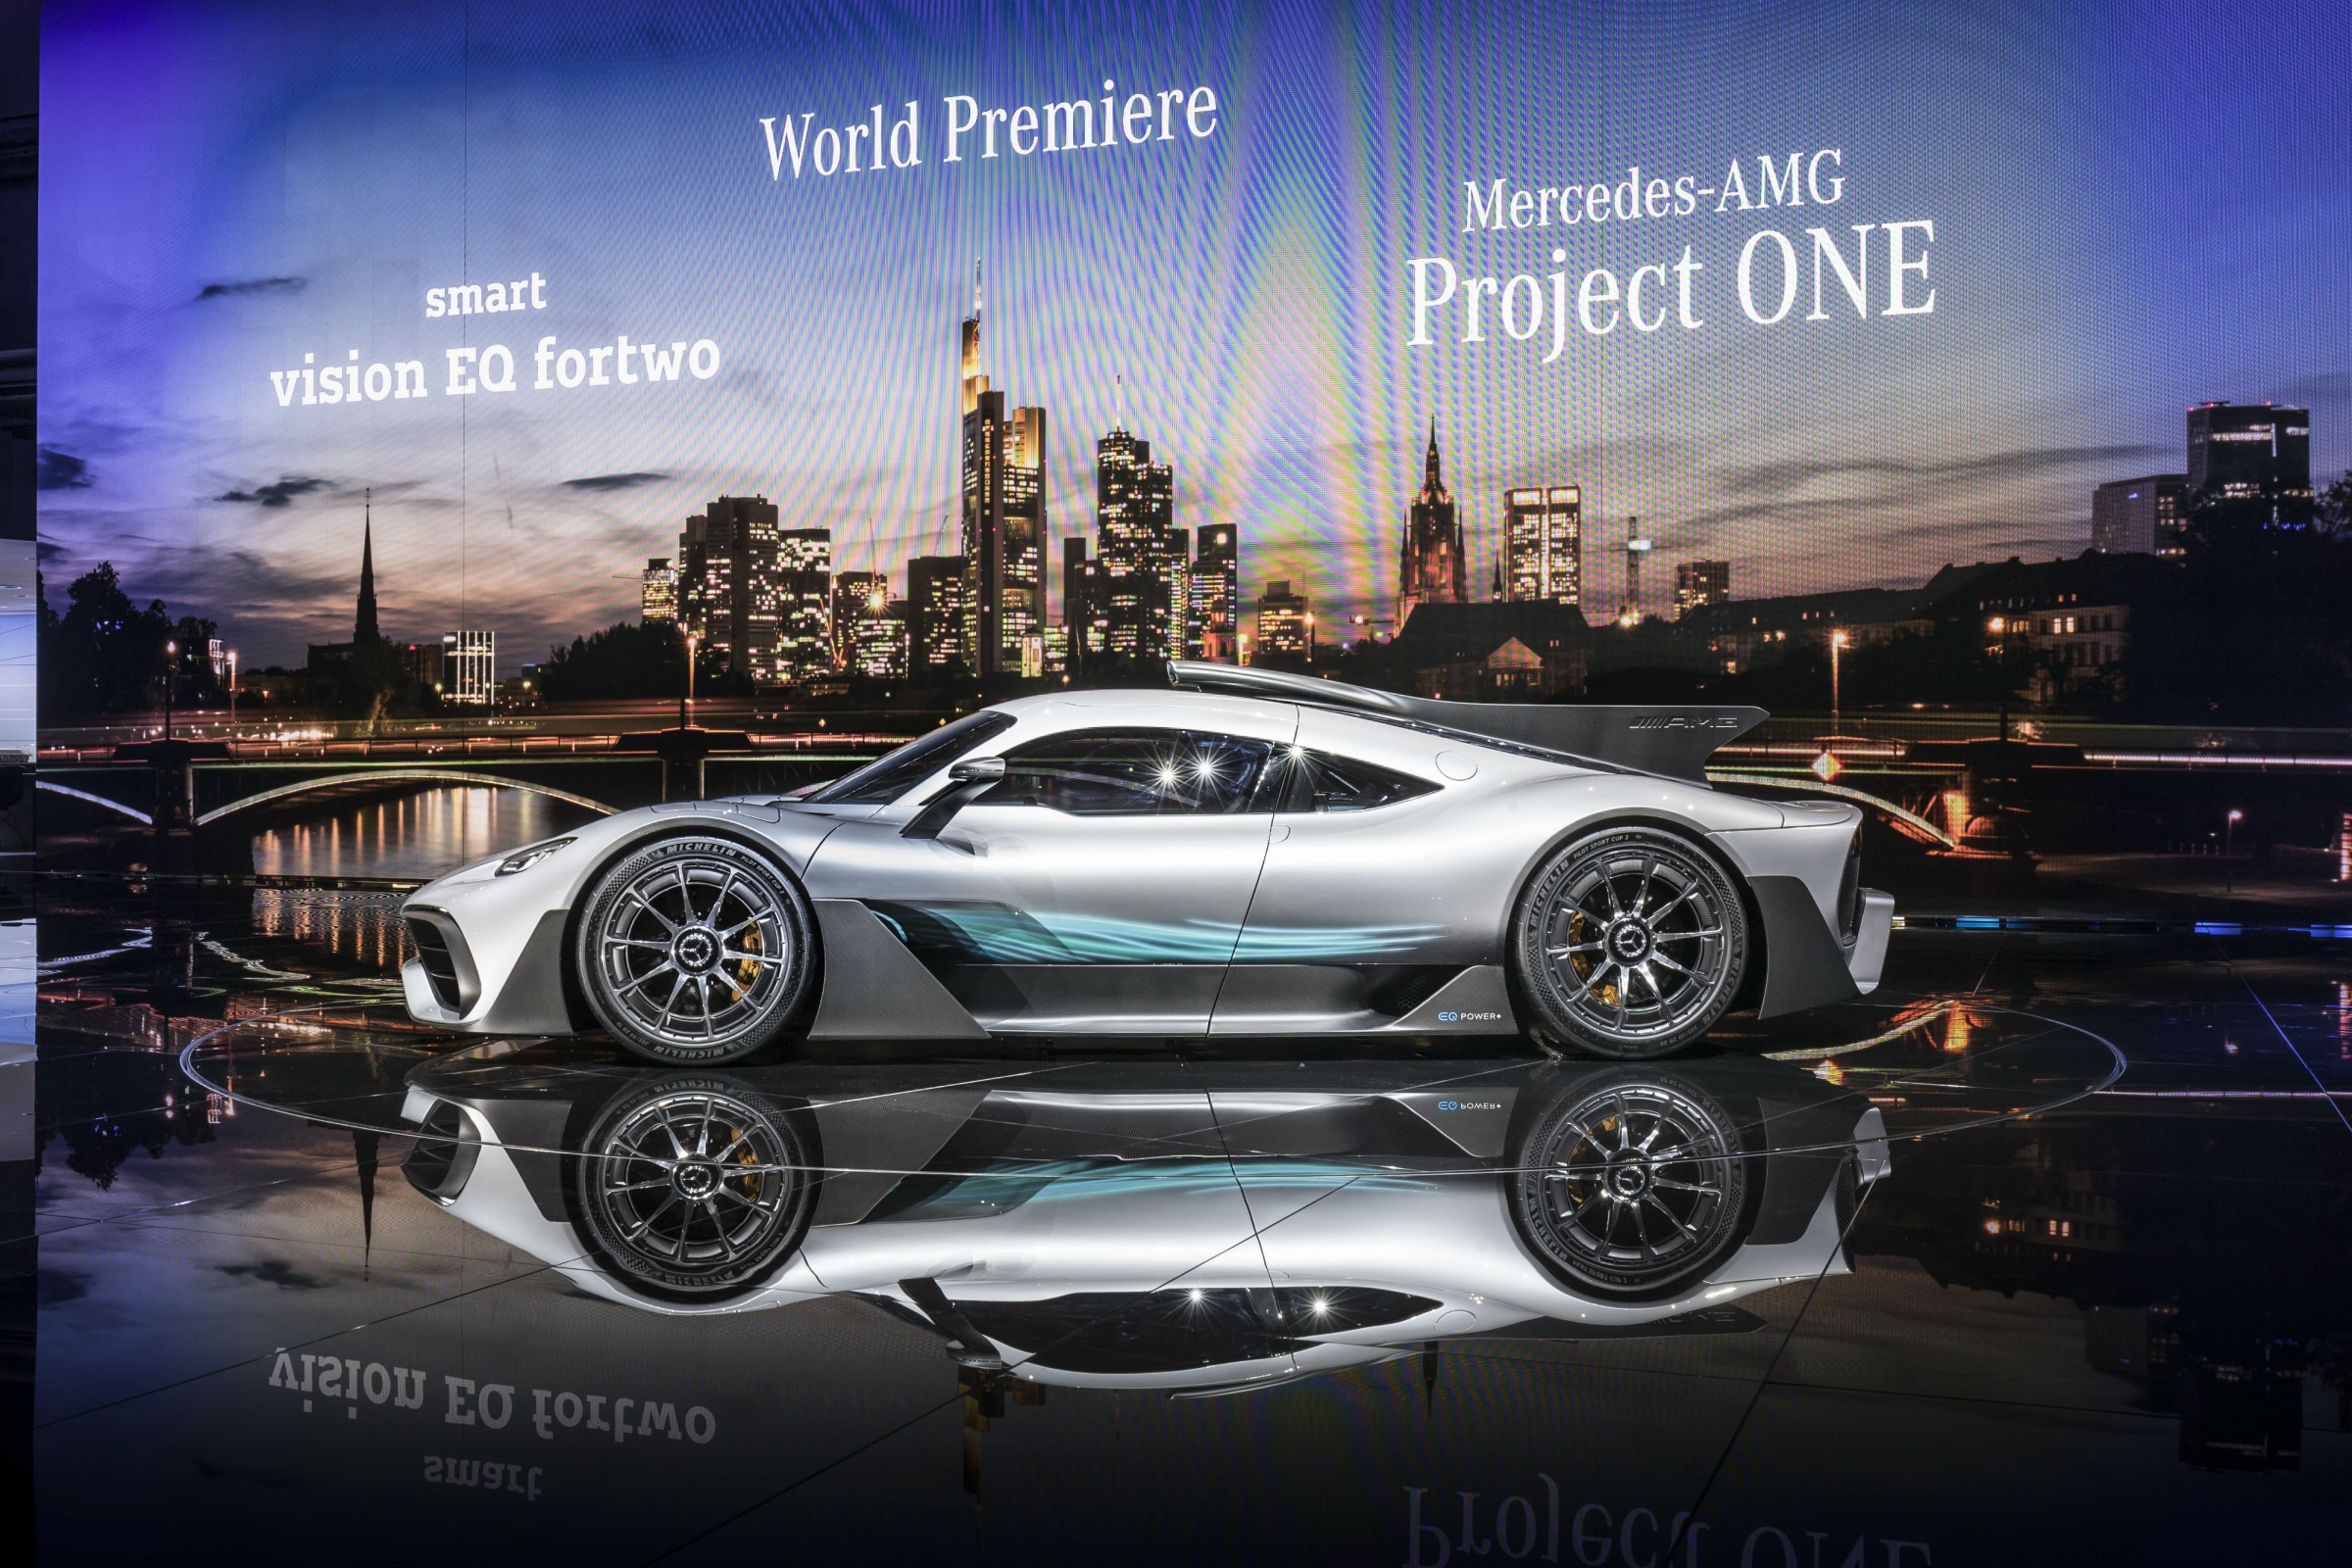  Mercedes-AMG Project ONE        